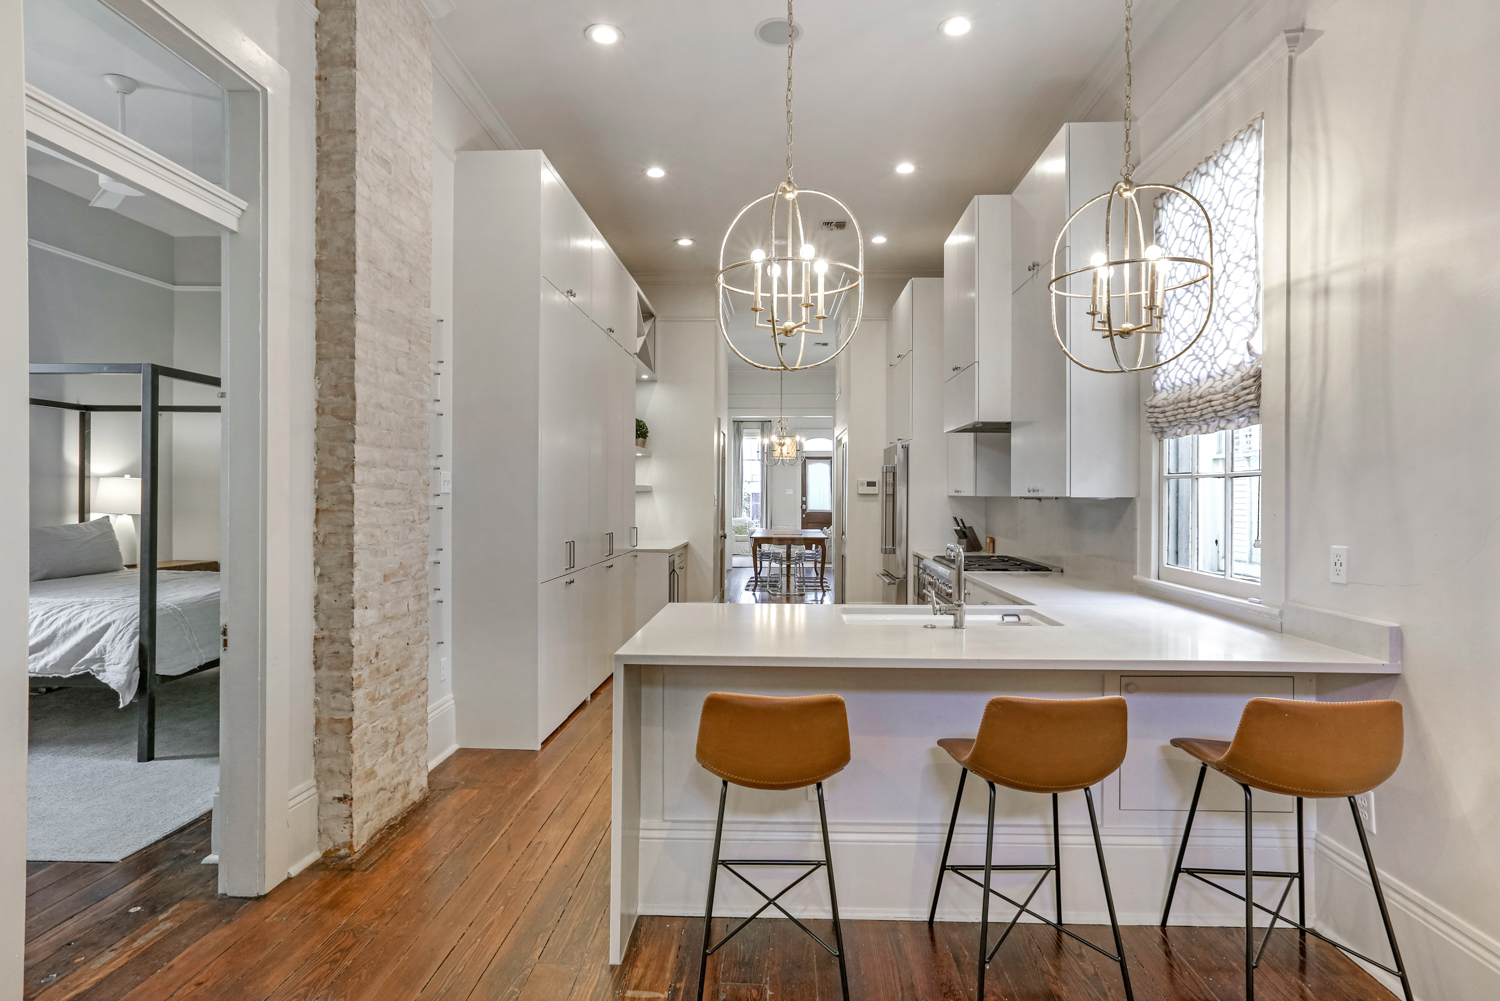 Beautiful Uptown home! Get the old charm yet modernize amenities. Causal yet refined! Walk to Magazine St. with many shops, restaurants, coffee shops and more!